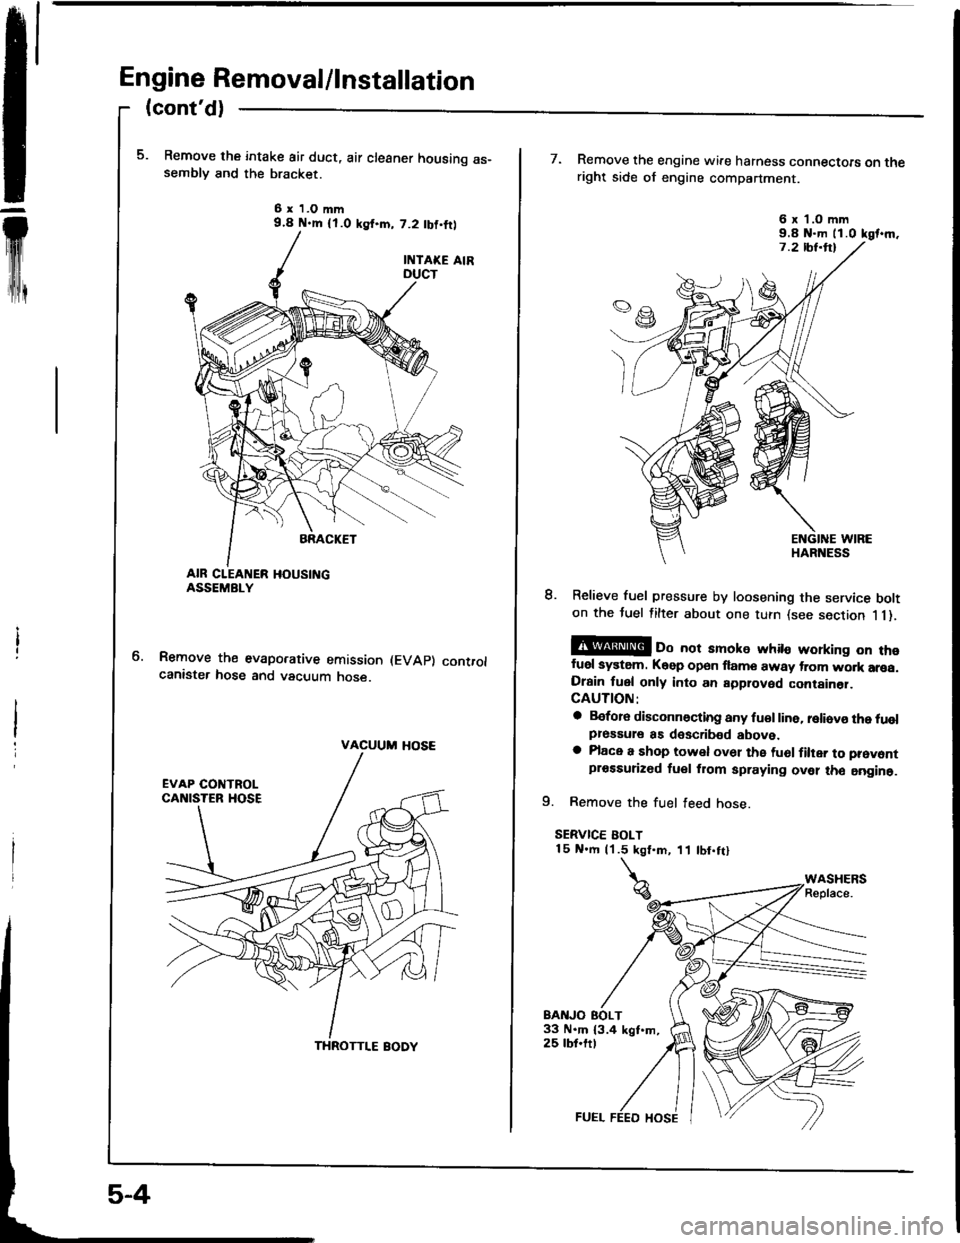 HONDA INTEGRA 1994 4.G Workshop Manual Engine Removal/lnstallation
m
(contd)
Remove the intake air duct, air cleaner housing as-semblv and the bracket.
6 x 1.O mm9.4 N.m {l.O ksf.m, 7.2 tbf,ftl
Remove the evaporative emission (EVAp) contr